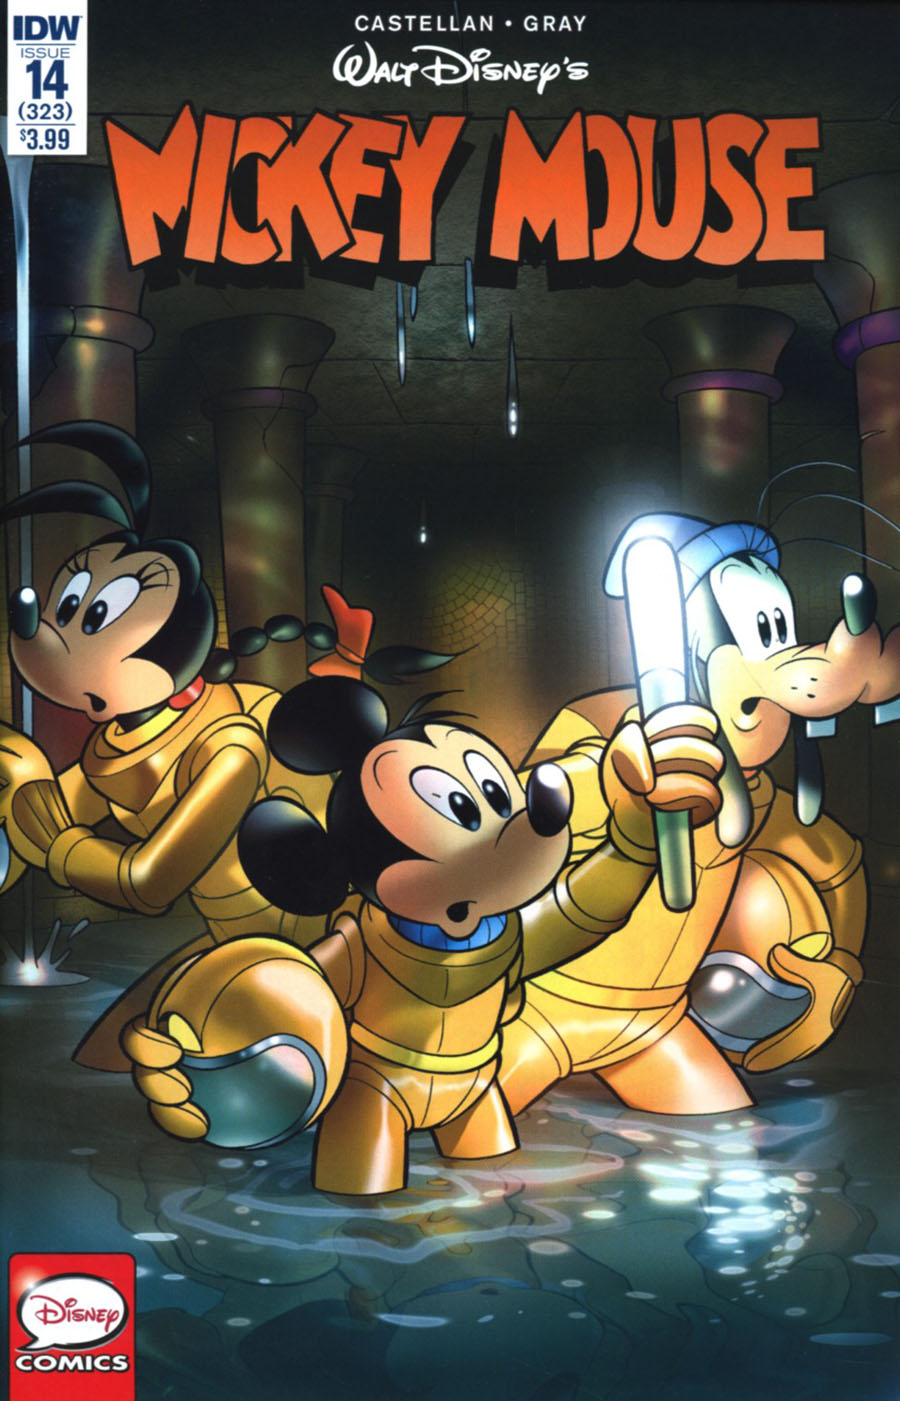 Mickey Mouse Vol 2 #14 Cover A Regular Andrea Casty Castellan Cover